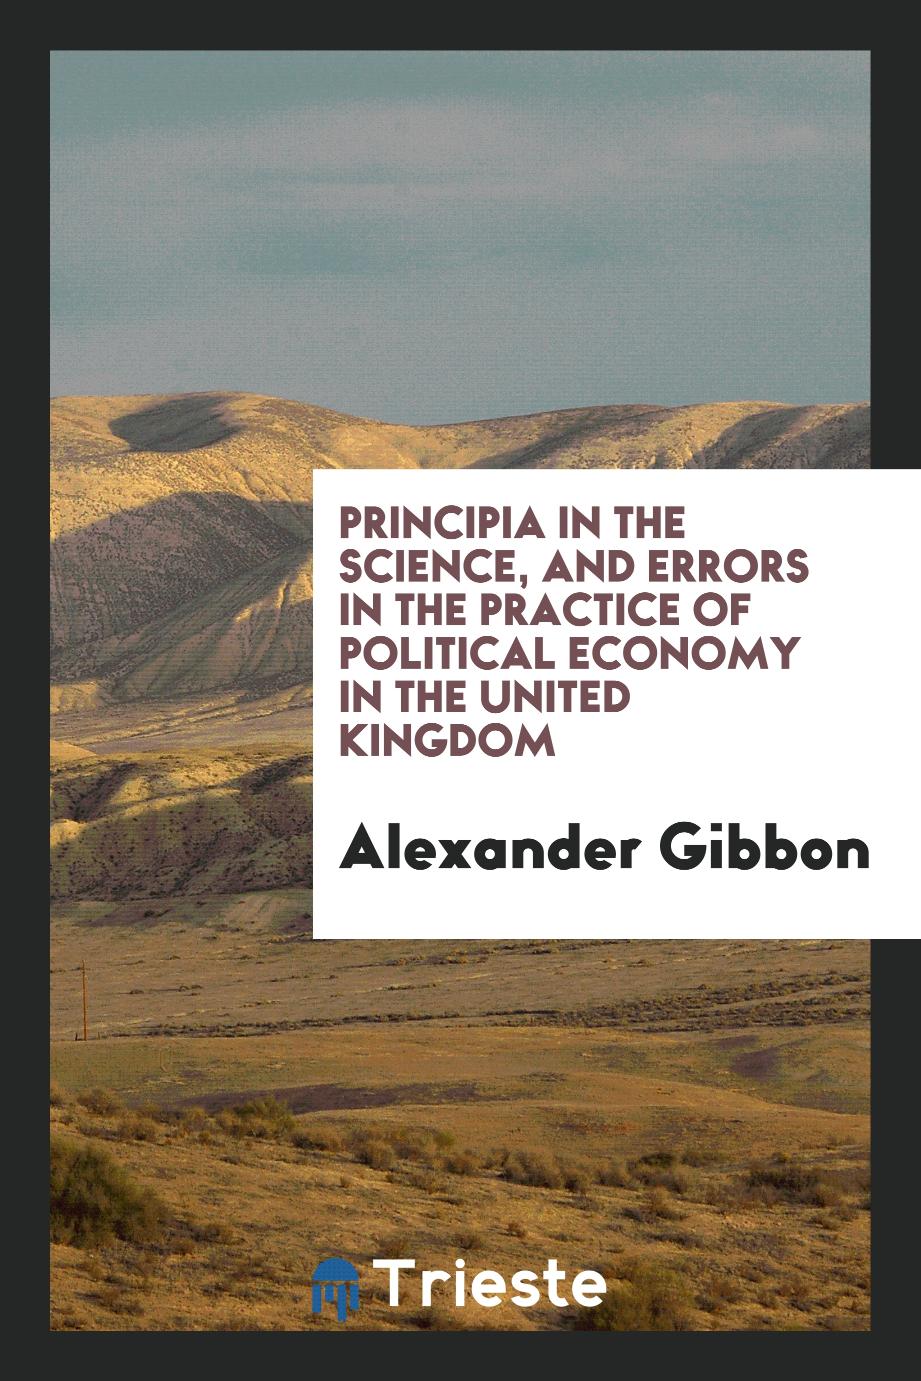 Principia in the science, and errors in the practice of political economy in the United Kingdom